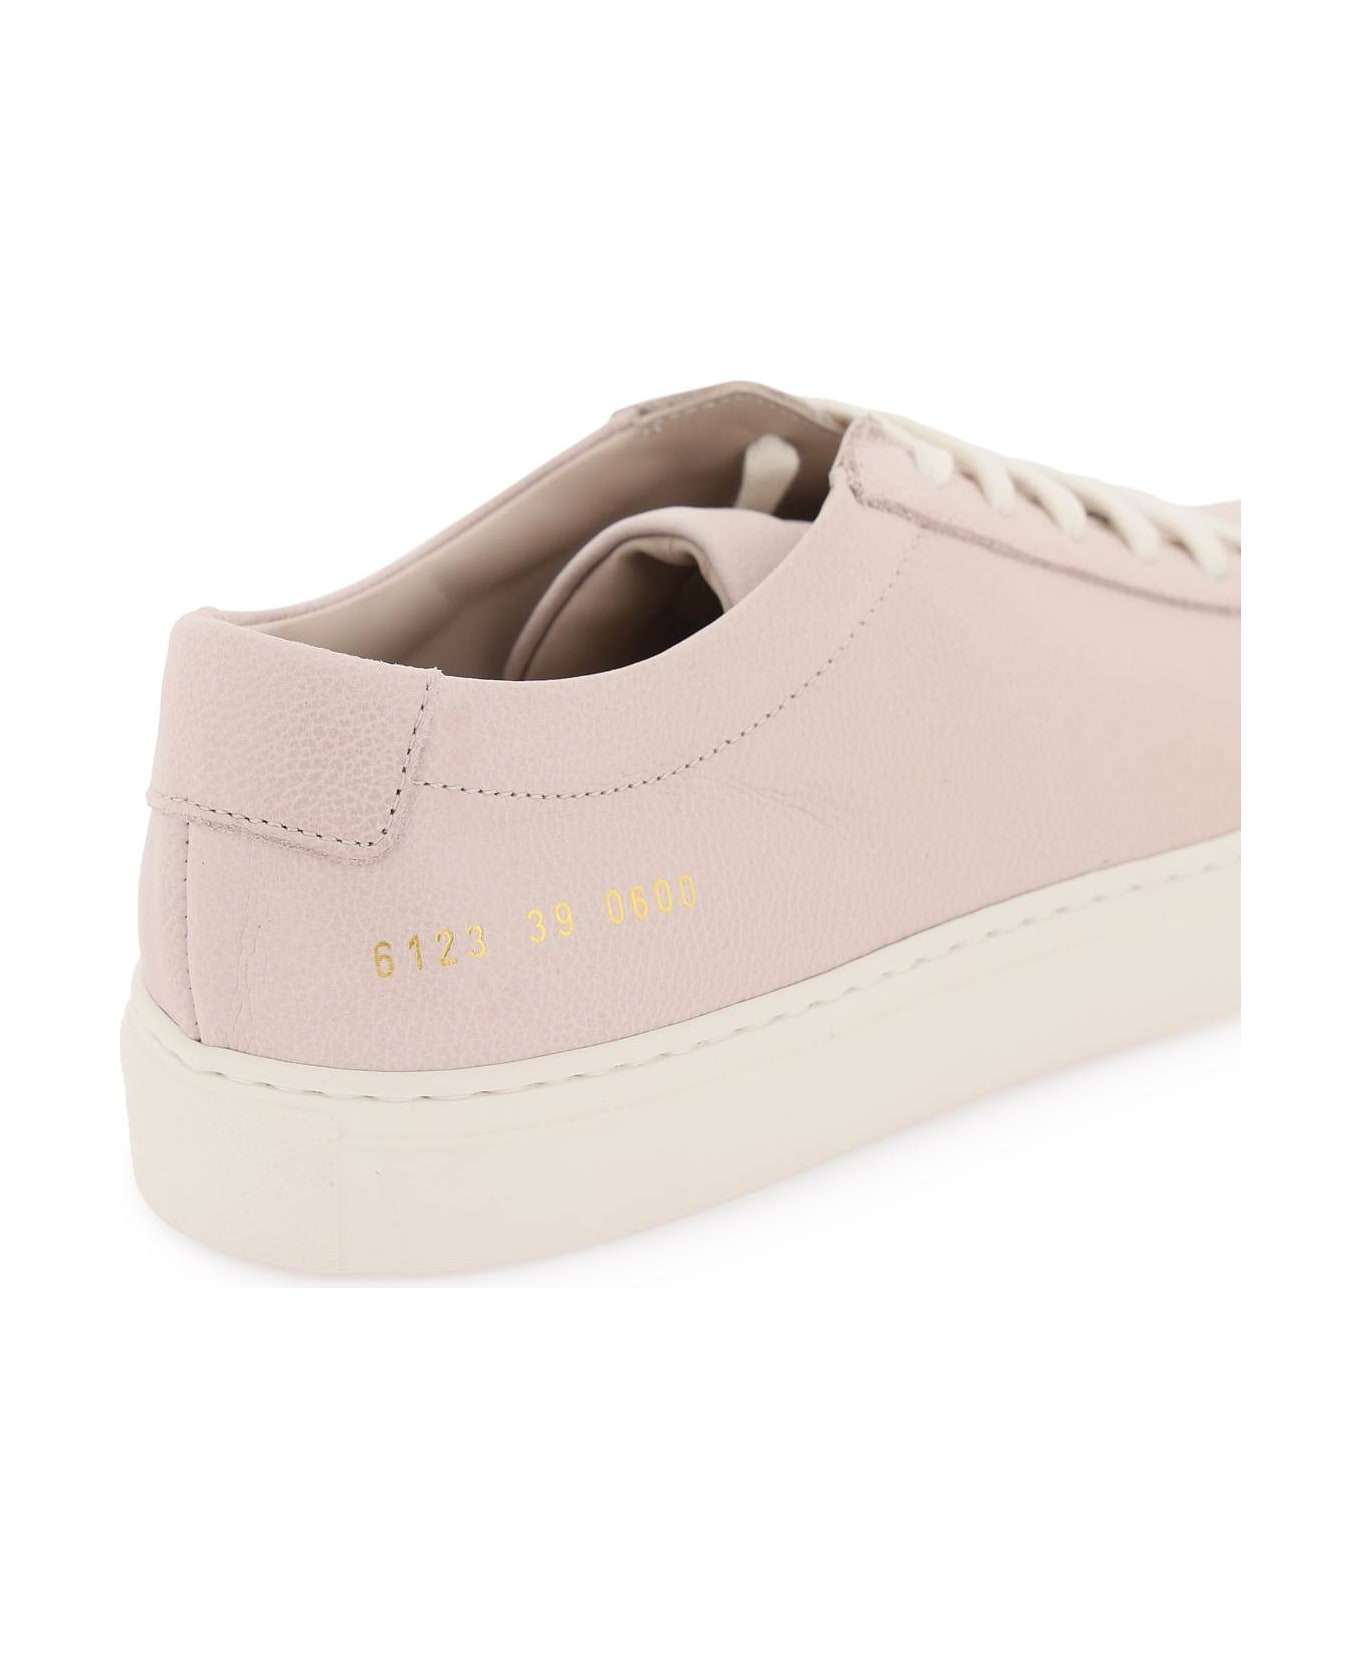 Common Projects Original Achilles Leather Sneakers - NUDE (Pink)